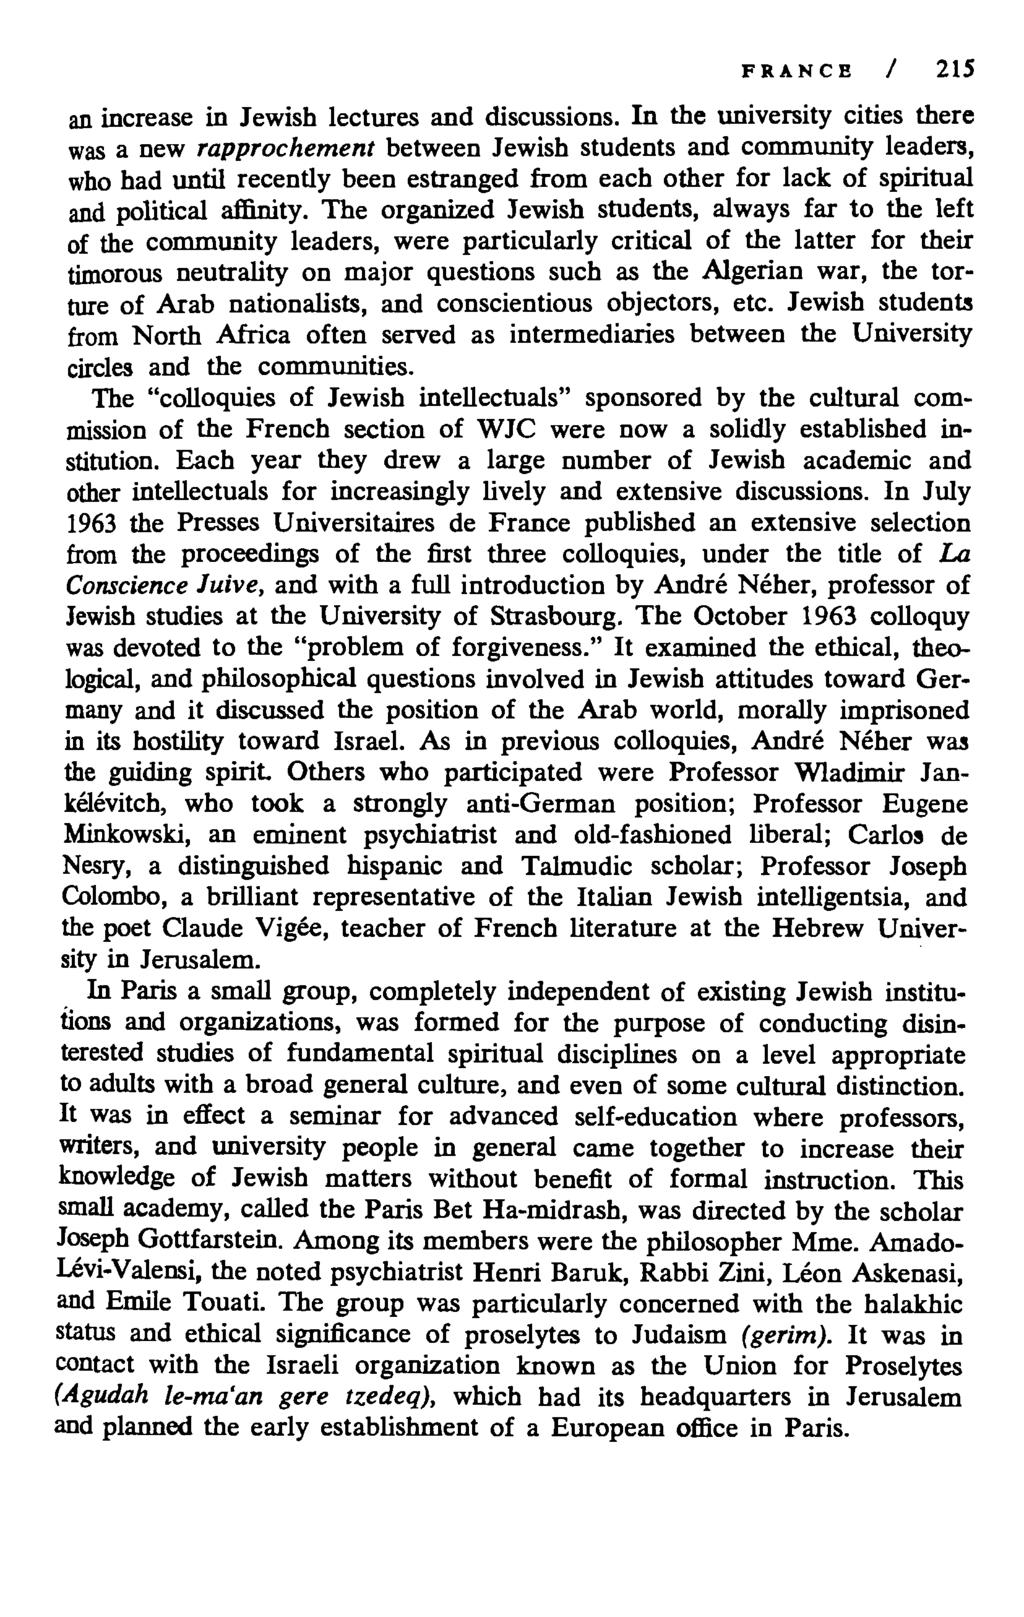 FRANCE / 215 an increase in Jewish lectures and discussions.